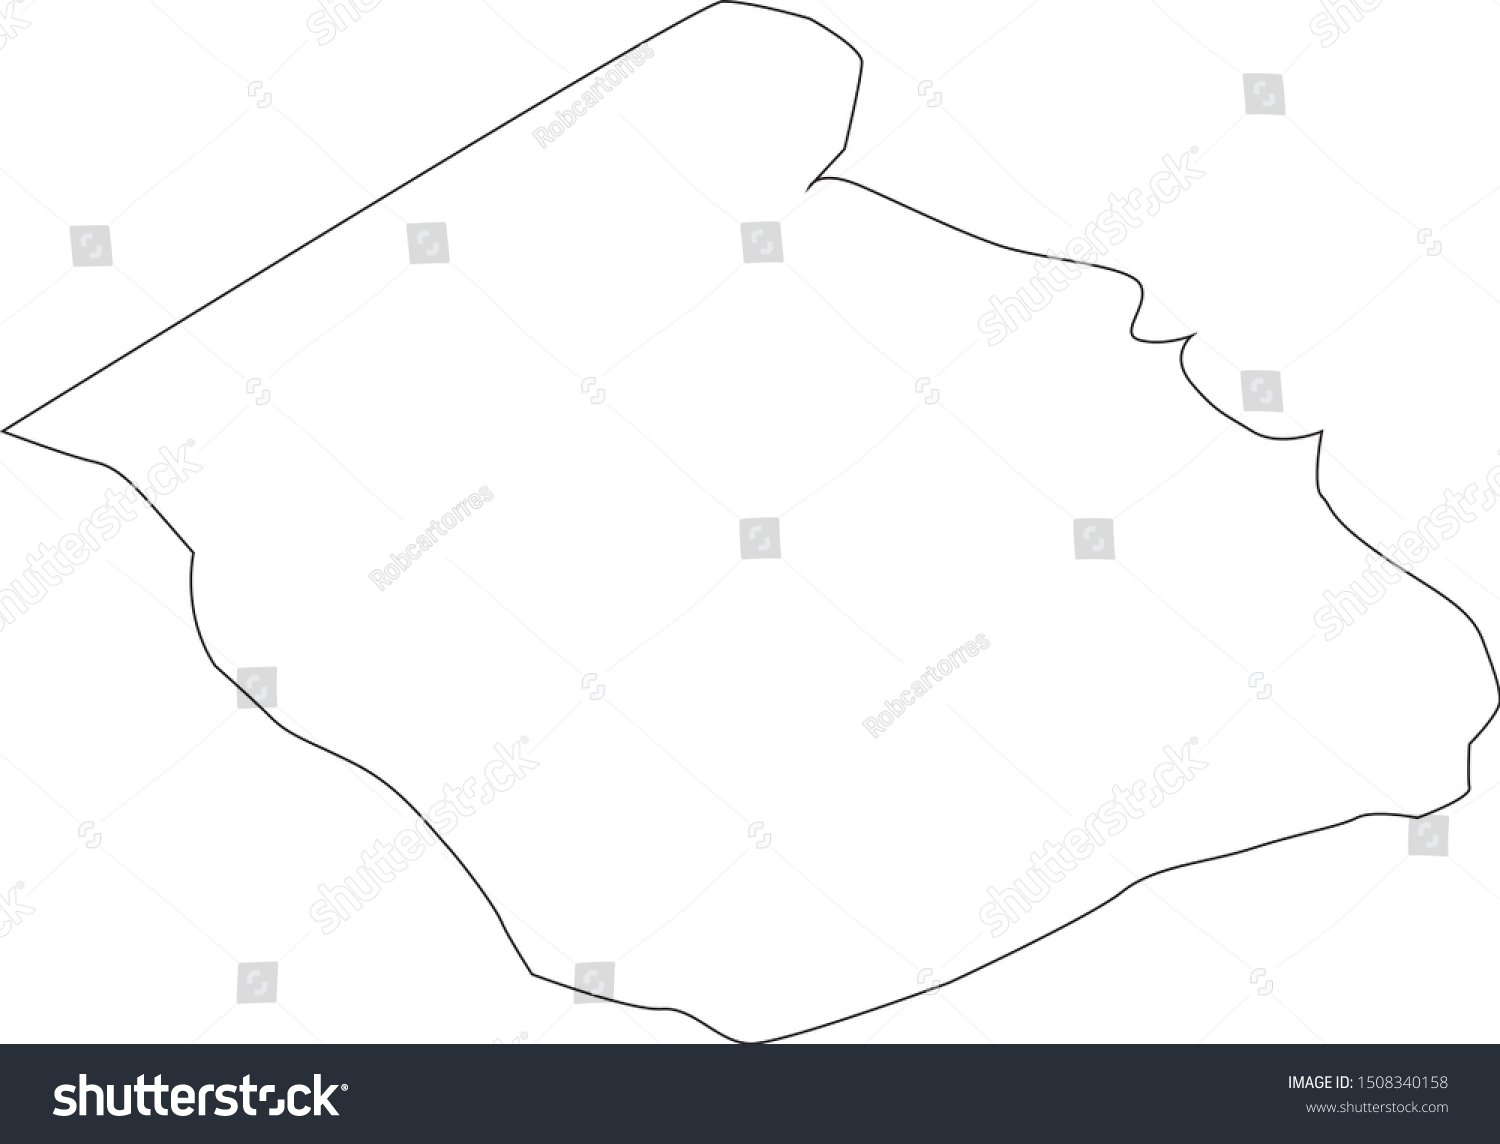 Burleson County Map In State Of Texas Royalty Free Stock Vector 1508340158 4124